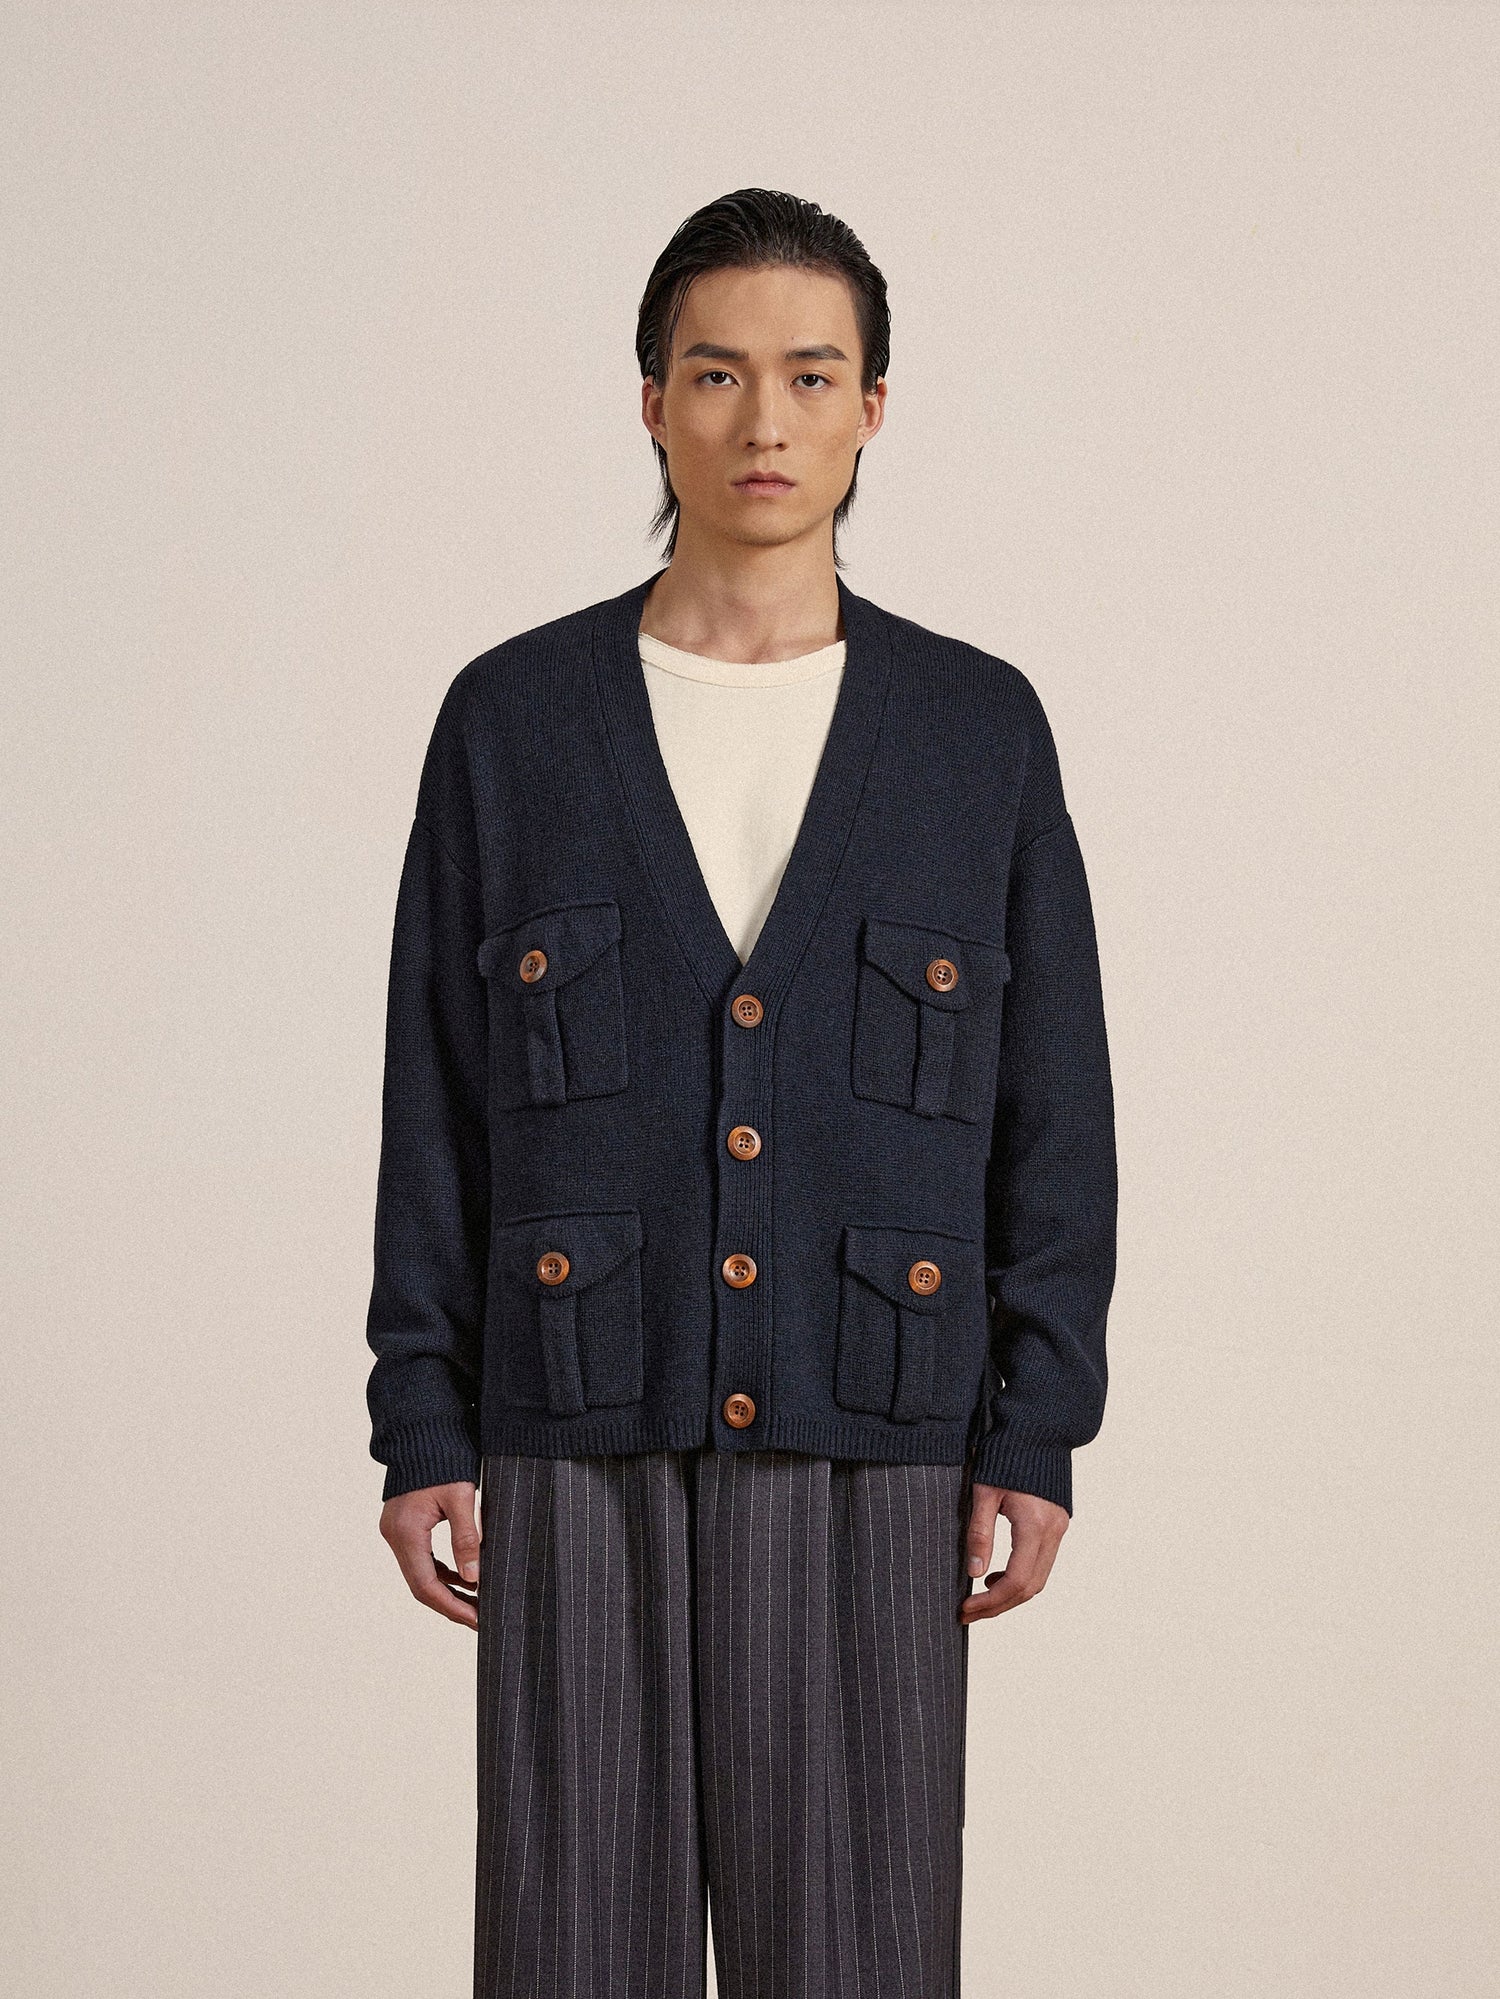 A man wearing a navy knit fabric Found Multi Pocket Cardigan with wooden buttons and pants.